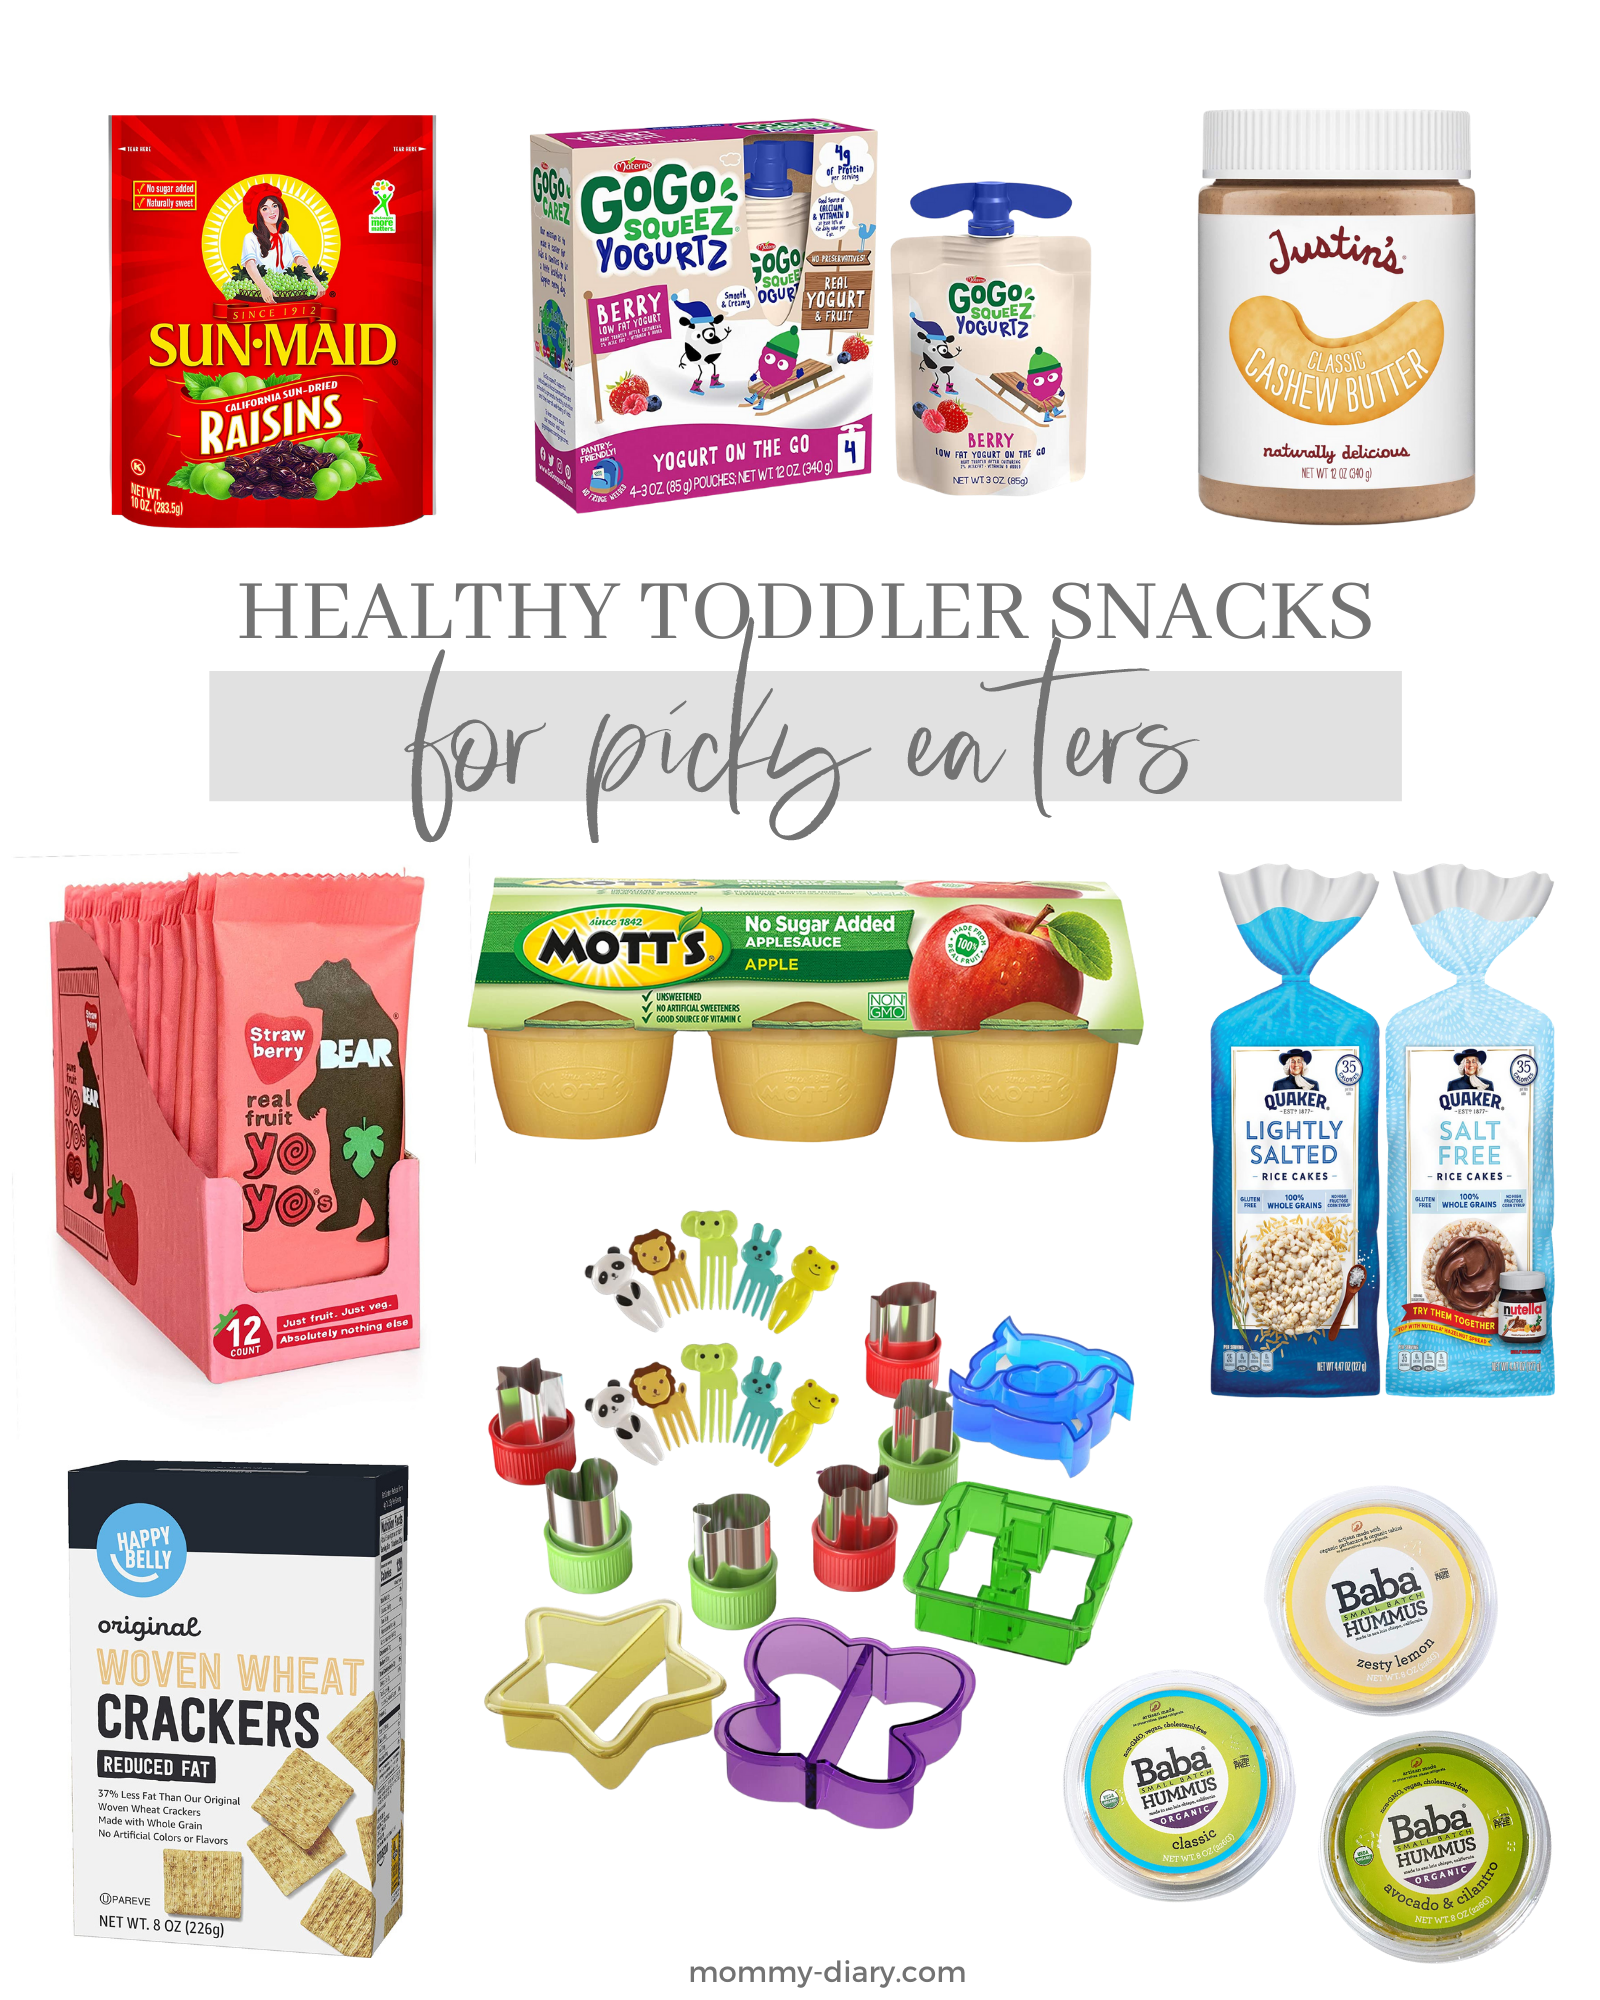 Healthy Toddler Snacks for Picky Eaters